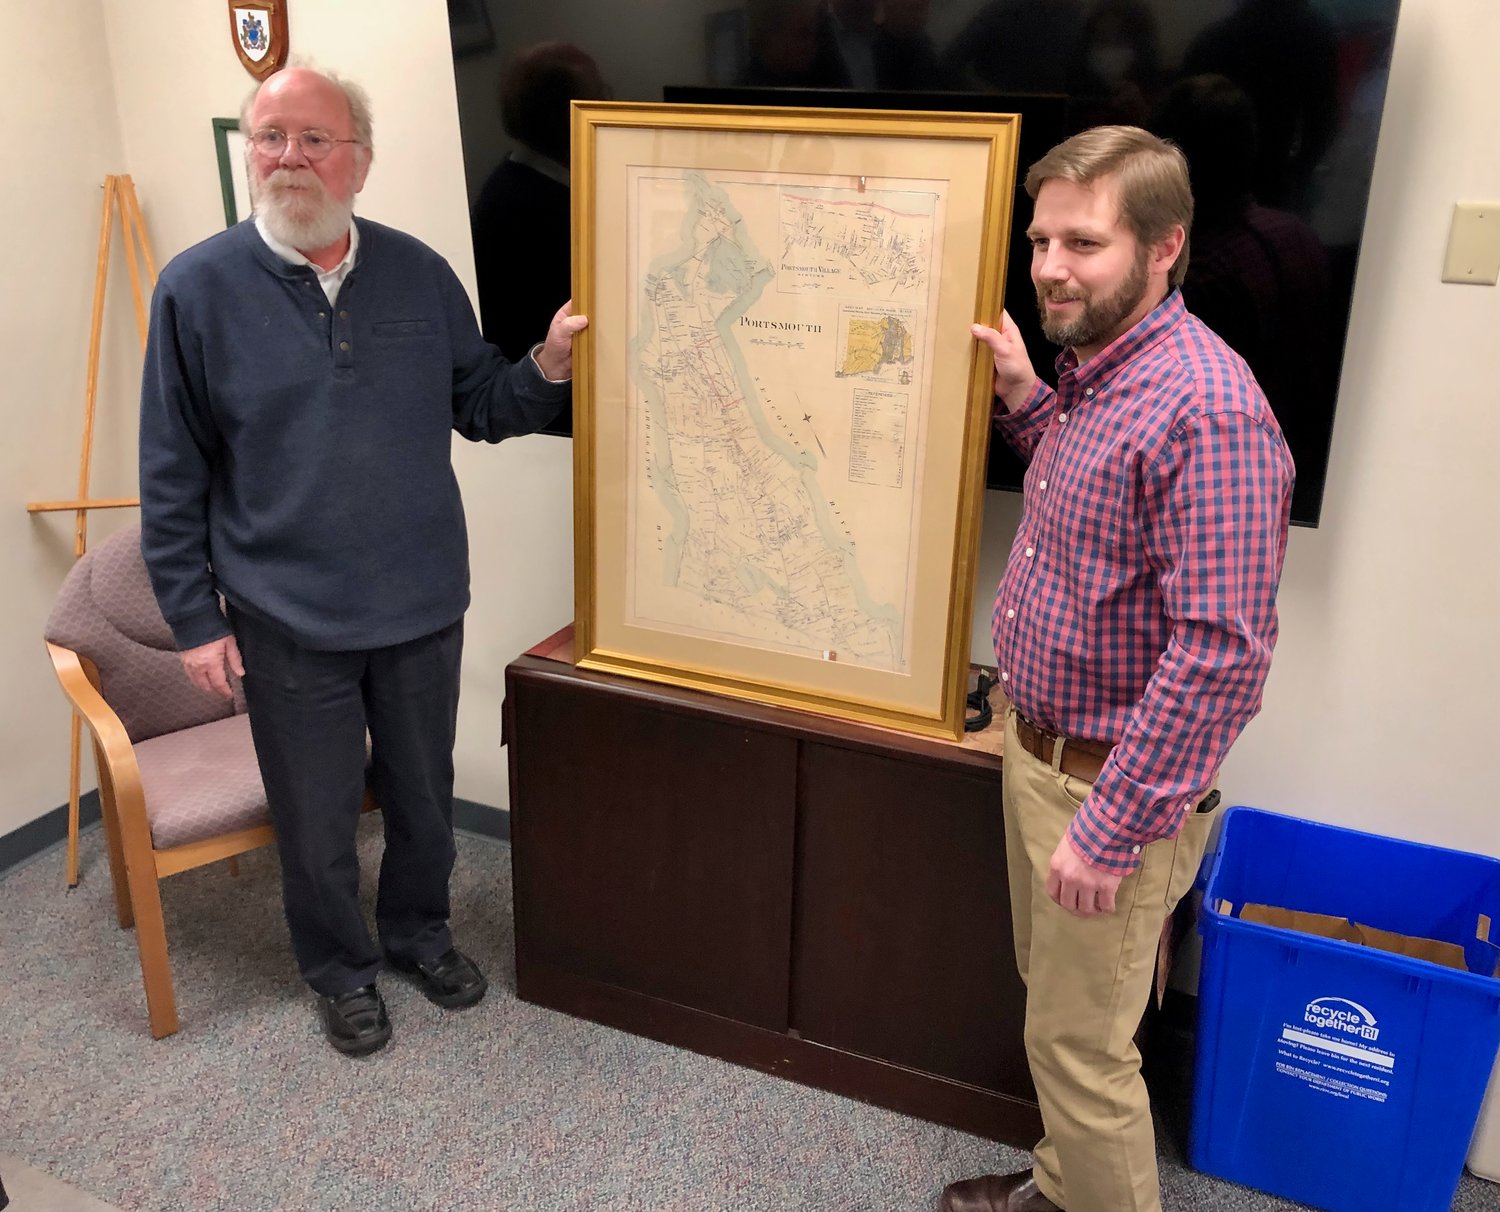 Town Planner Gary Crosby (left) and Assistant Planner Mike Asciola pose with a circa 1900-1905 map of Portsmouth that was gifted to Asciola, who’s taken a planning job in New Hampshire.